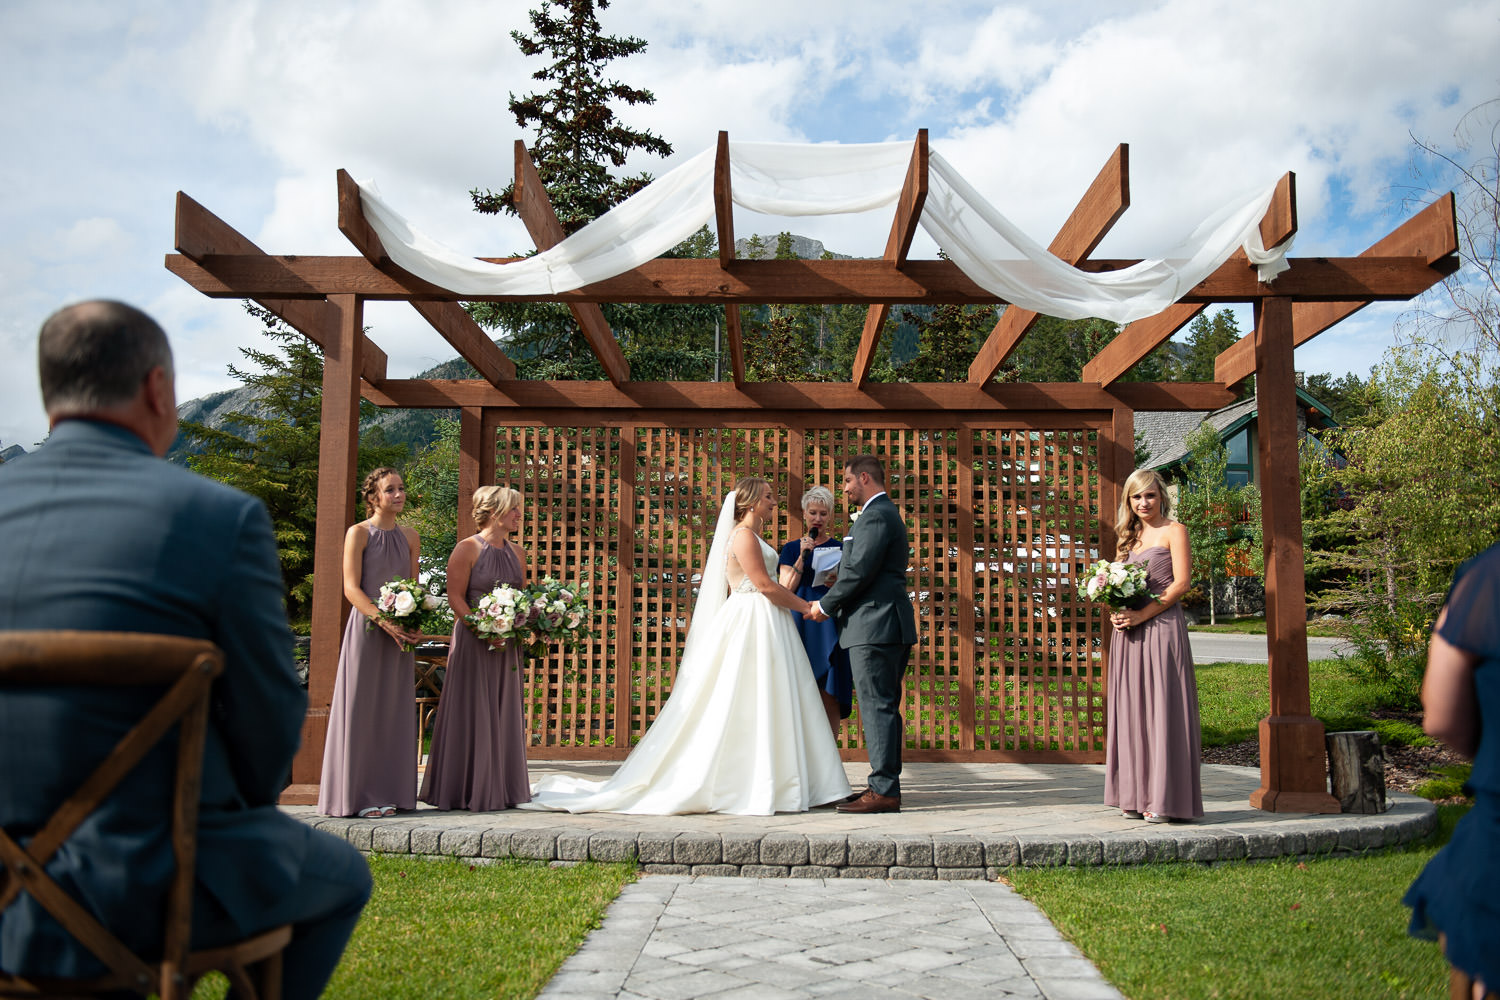 Wedding ceremony at Creekside Villas in Canmore captured by Tara Whittaker Photography